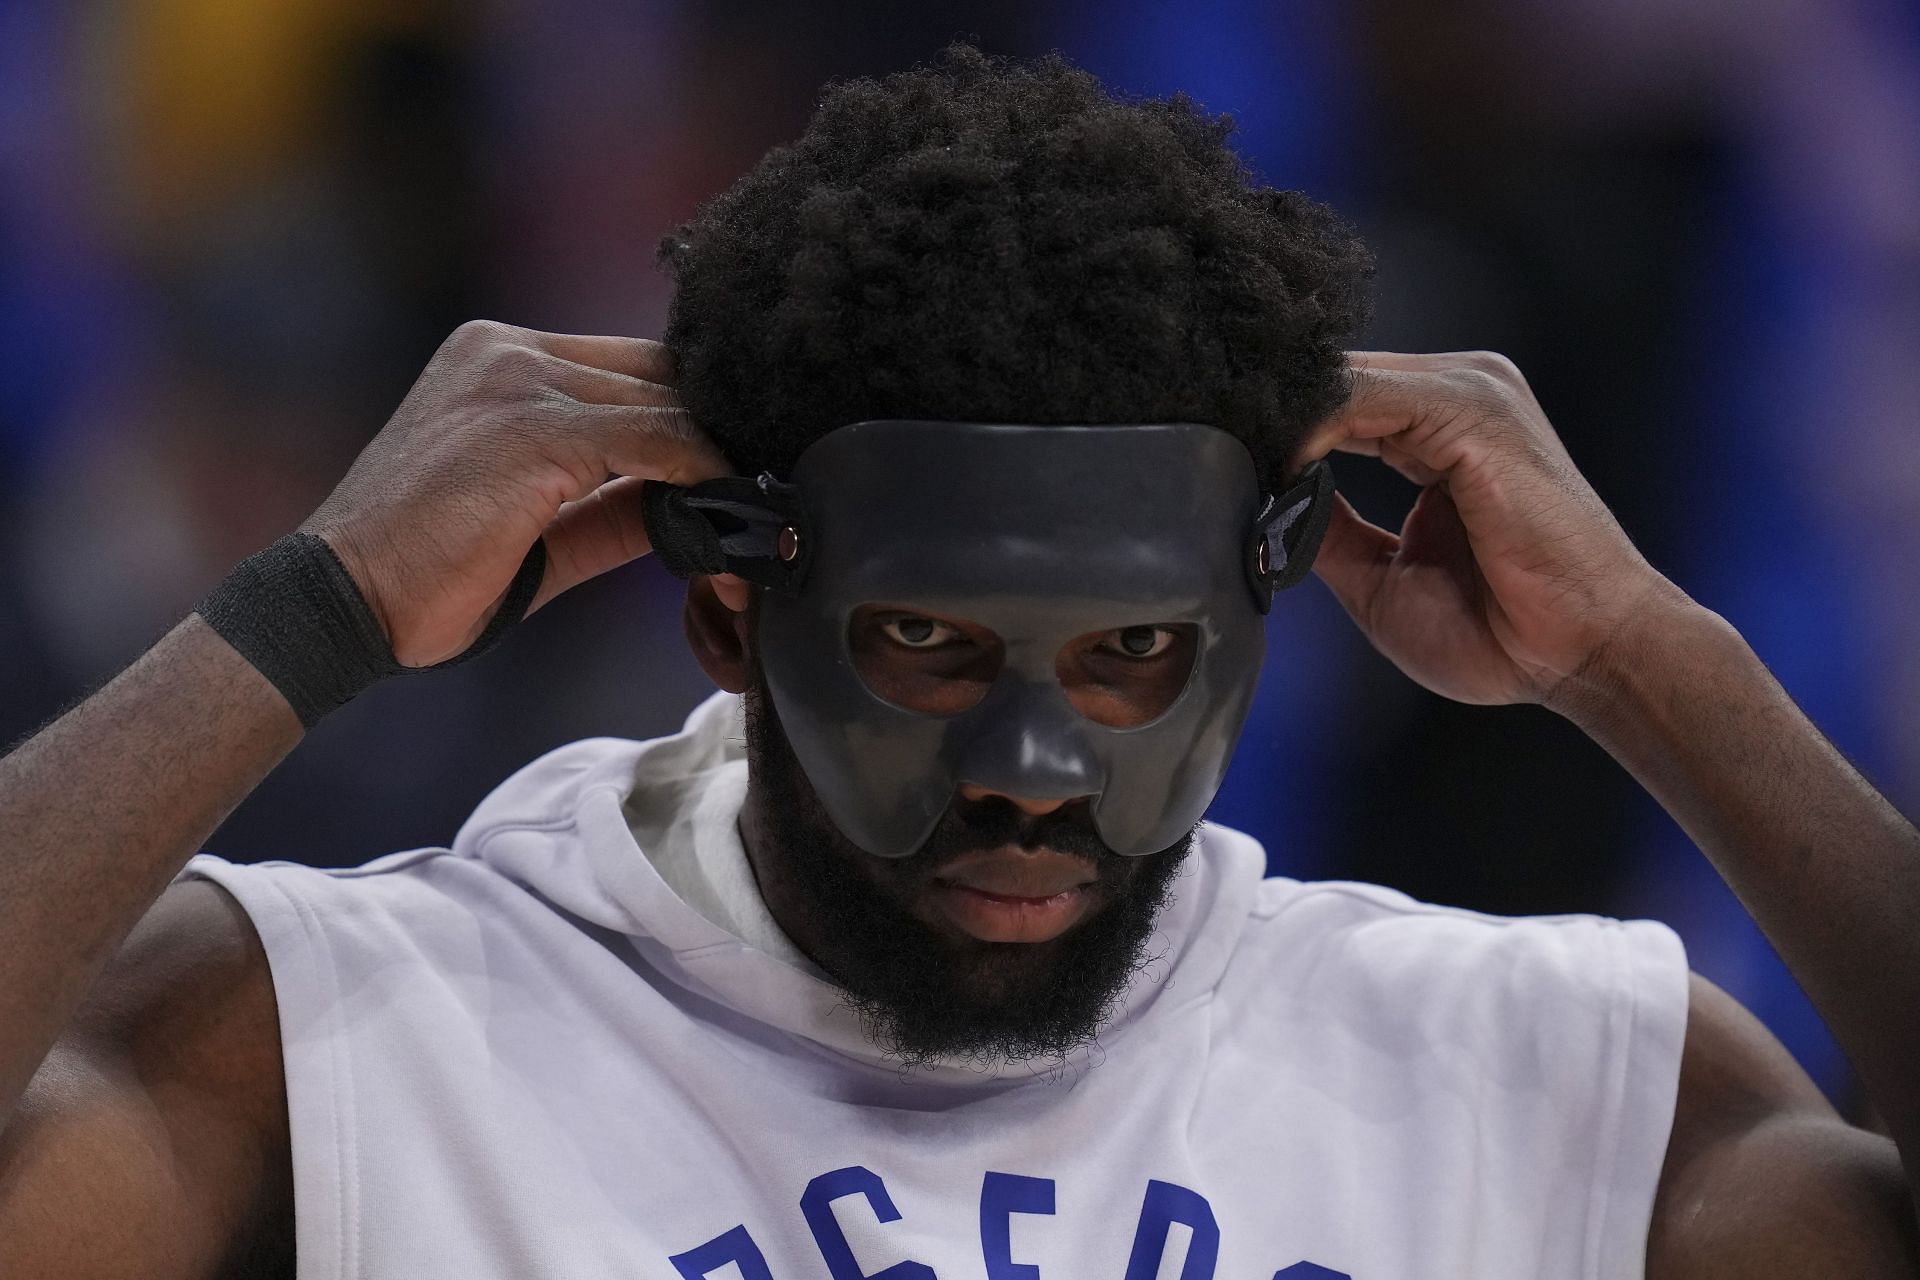 Joel Embiid took the court in Game 3 against the Miami Heat with a mask